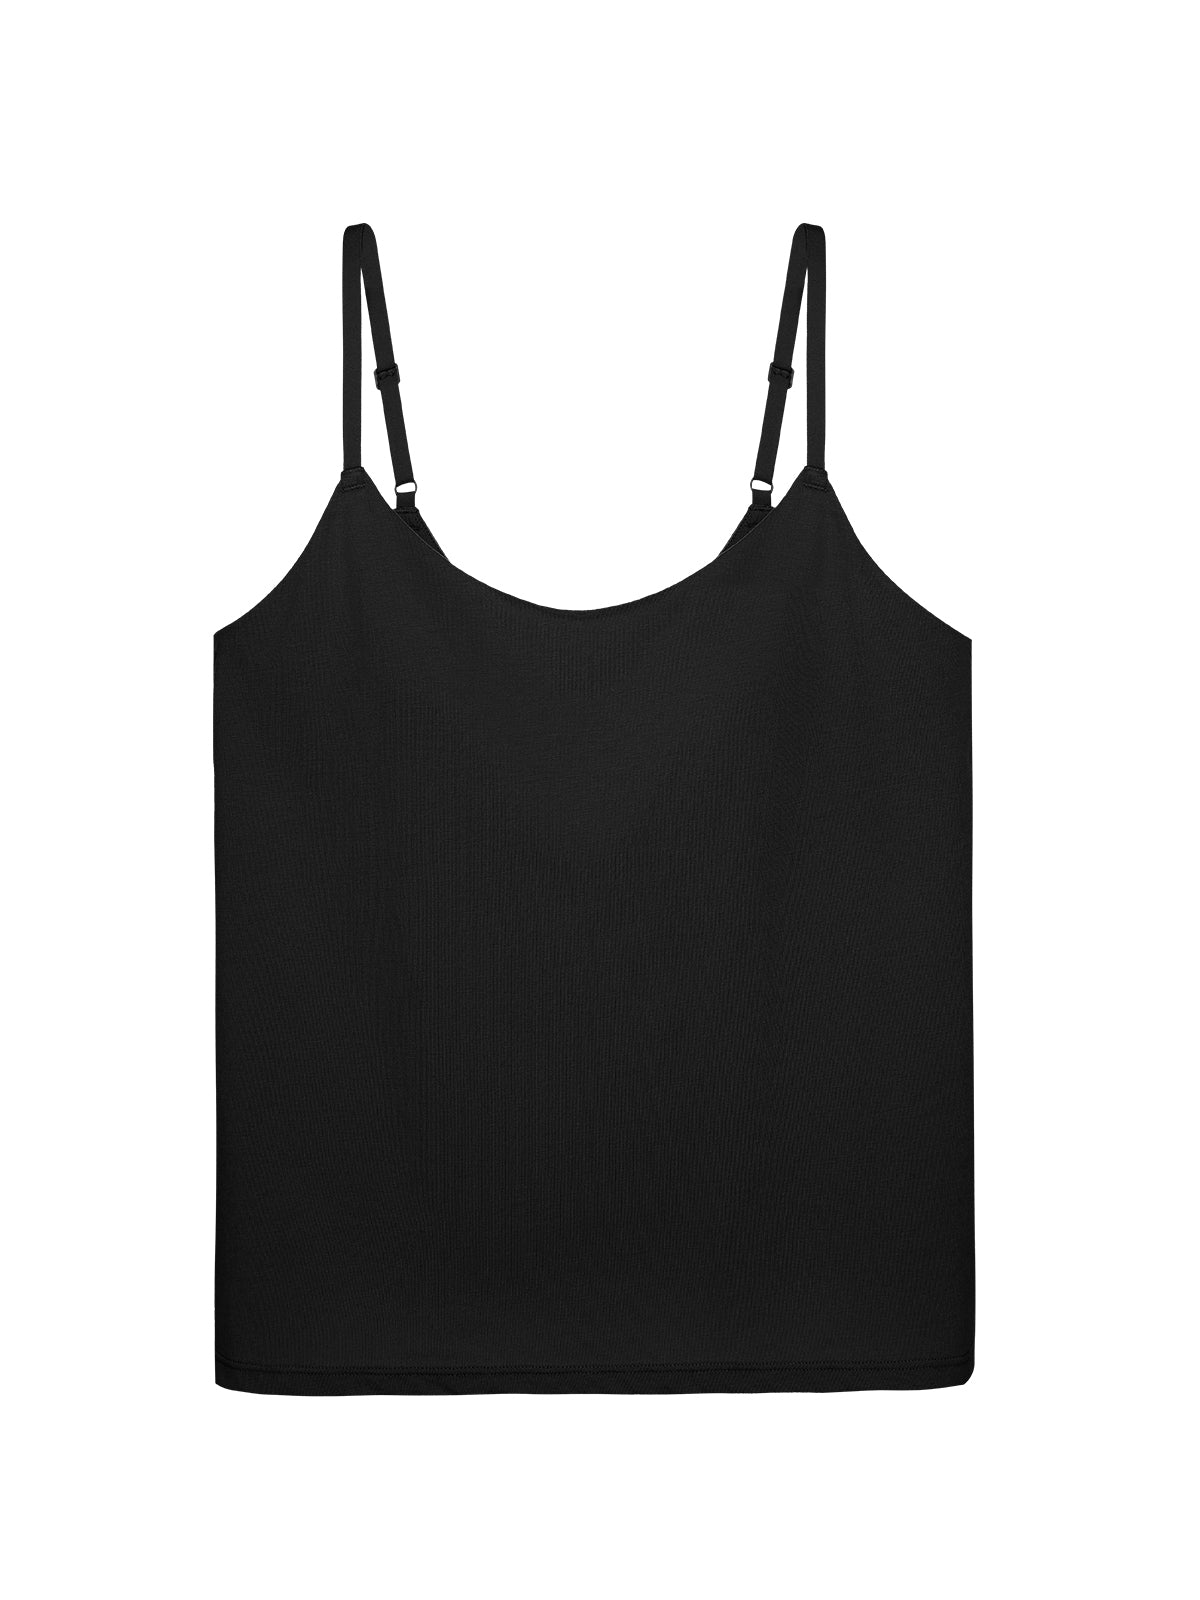 Low-Backed Bra Cami Top